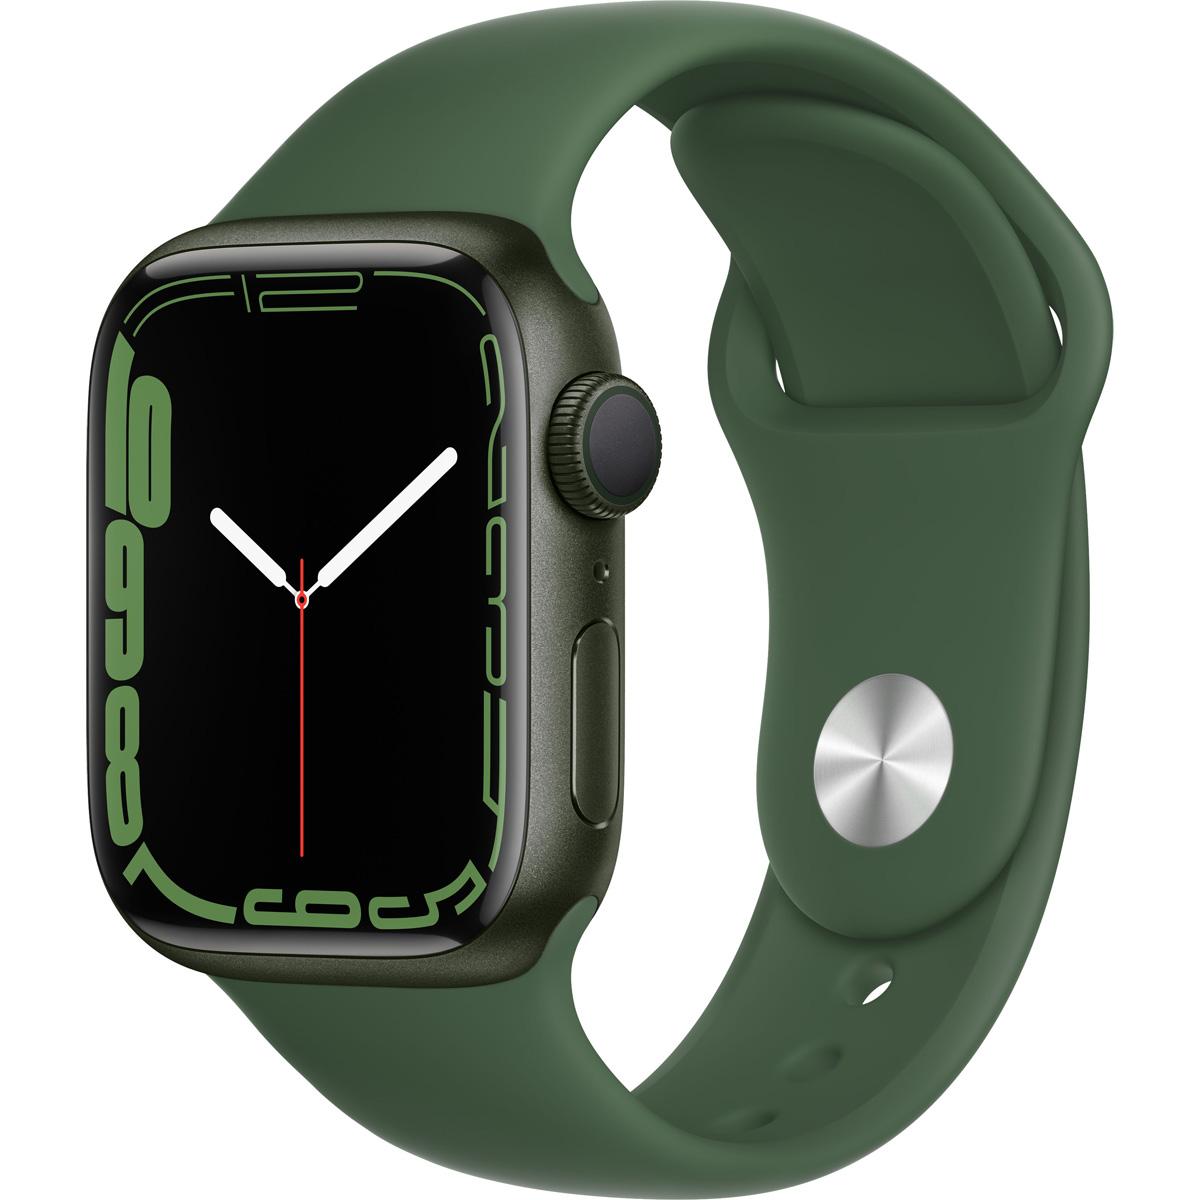 Apple Watch Series 7 41mm Refurbished Smartwatch for $157.99 Shipped